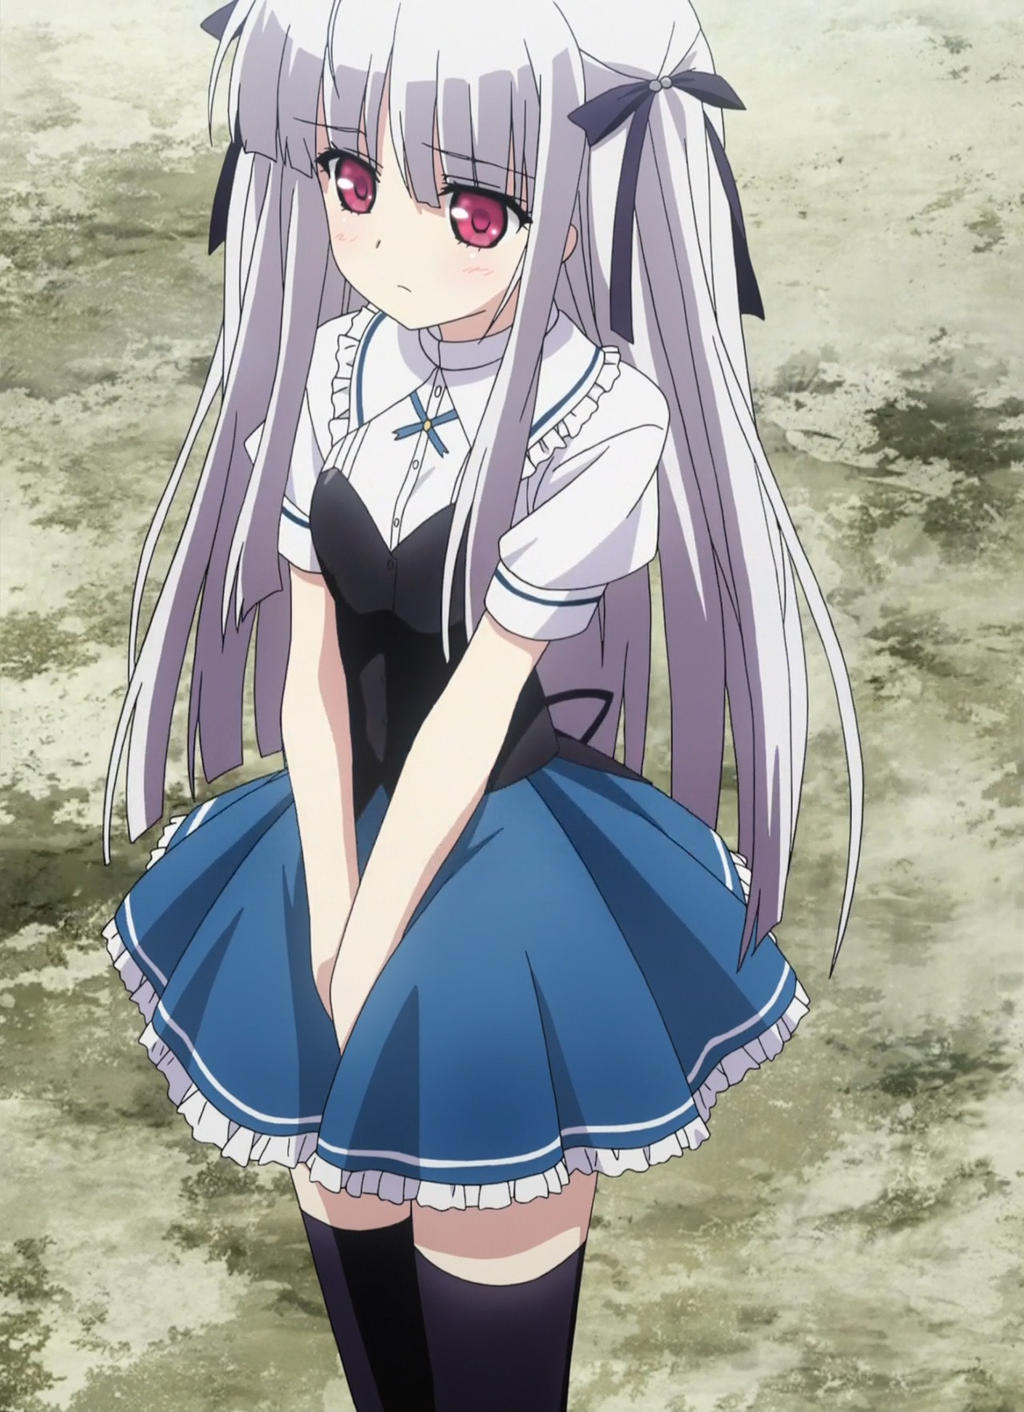 Absolute Duo Stitch: Julie Sigtuna 21 by anime4799 on DeviantArt